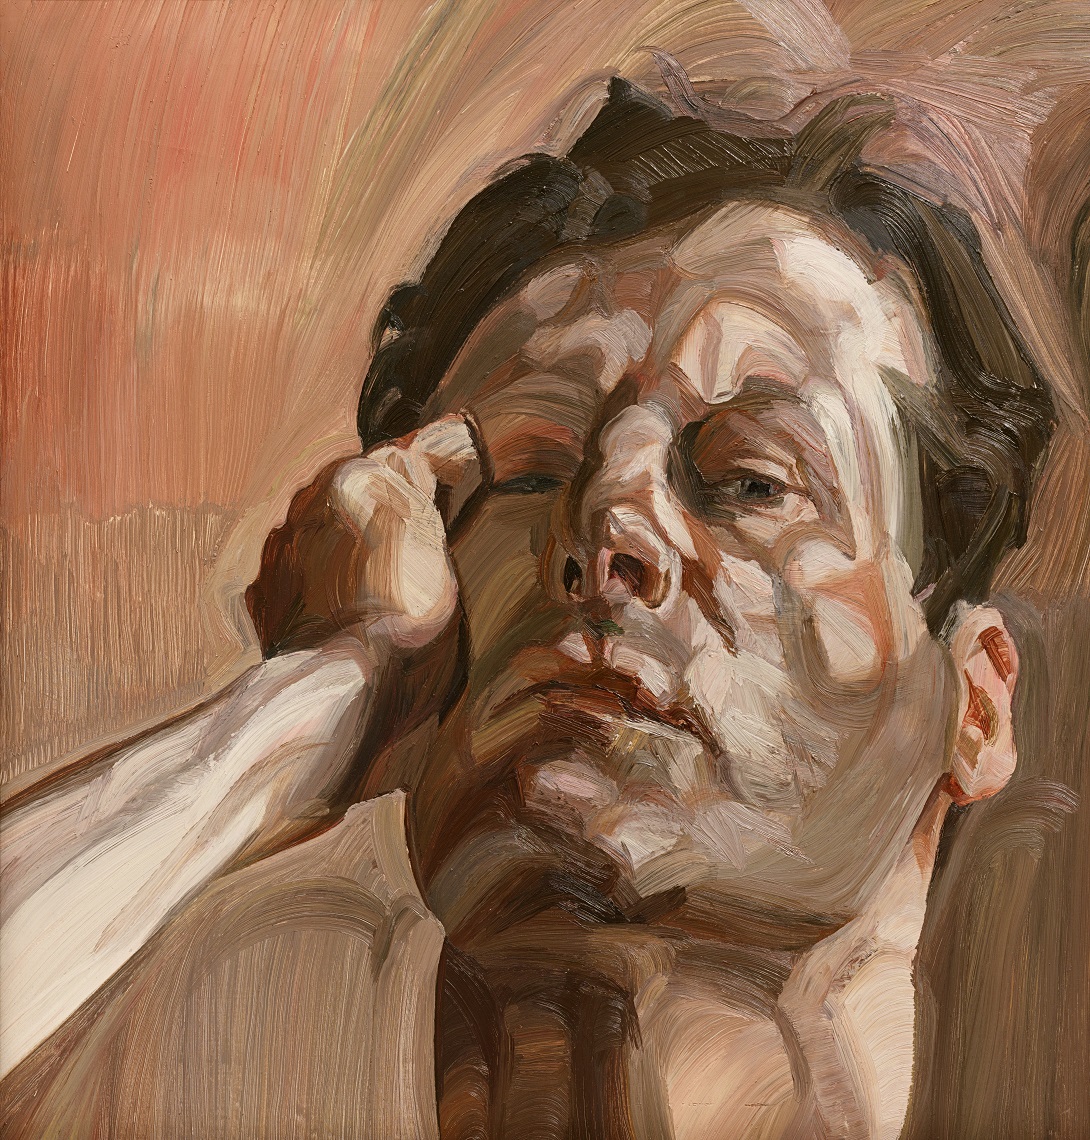 Man's Head (Self Portrait) 1963 (oil on canvas) by Freud, Lucian (1922-2011); 53.3x50.8 cm; Whitworth Art Gallery, The University of Manchester, UK; © The Lucian Freud Archive